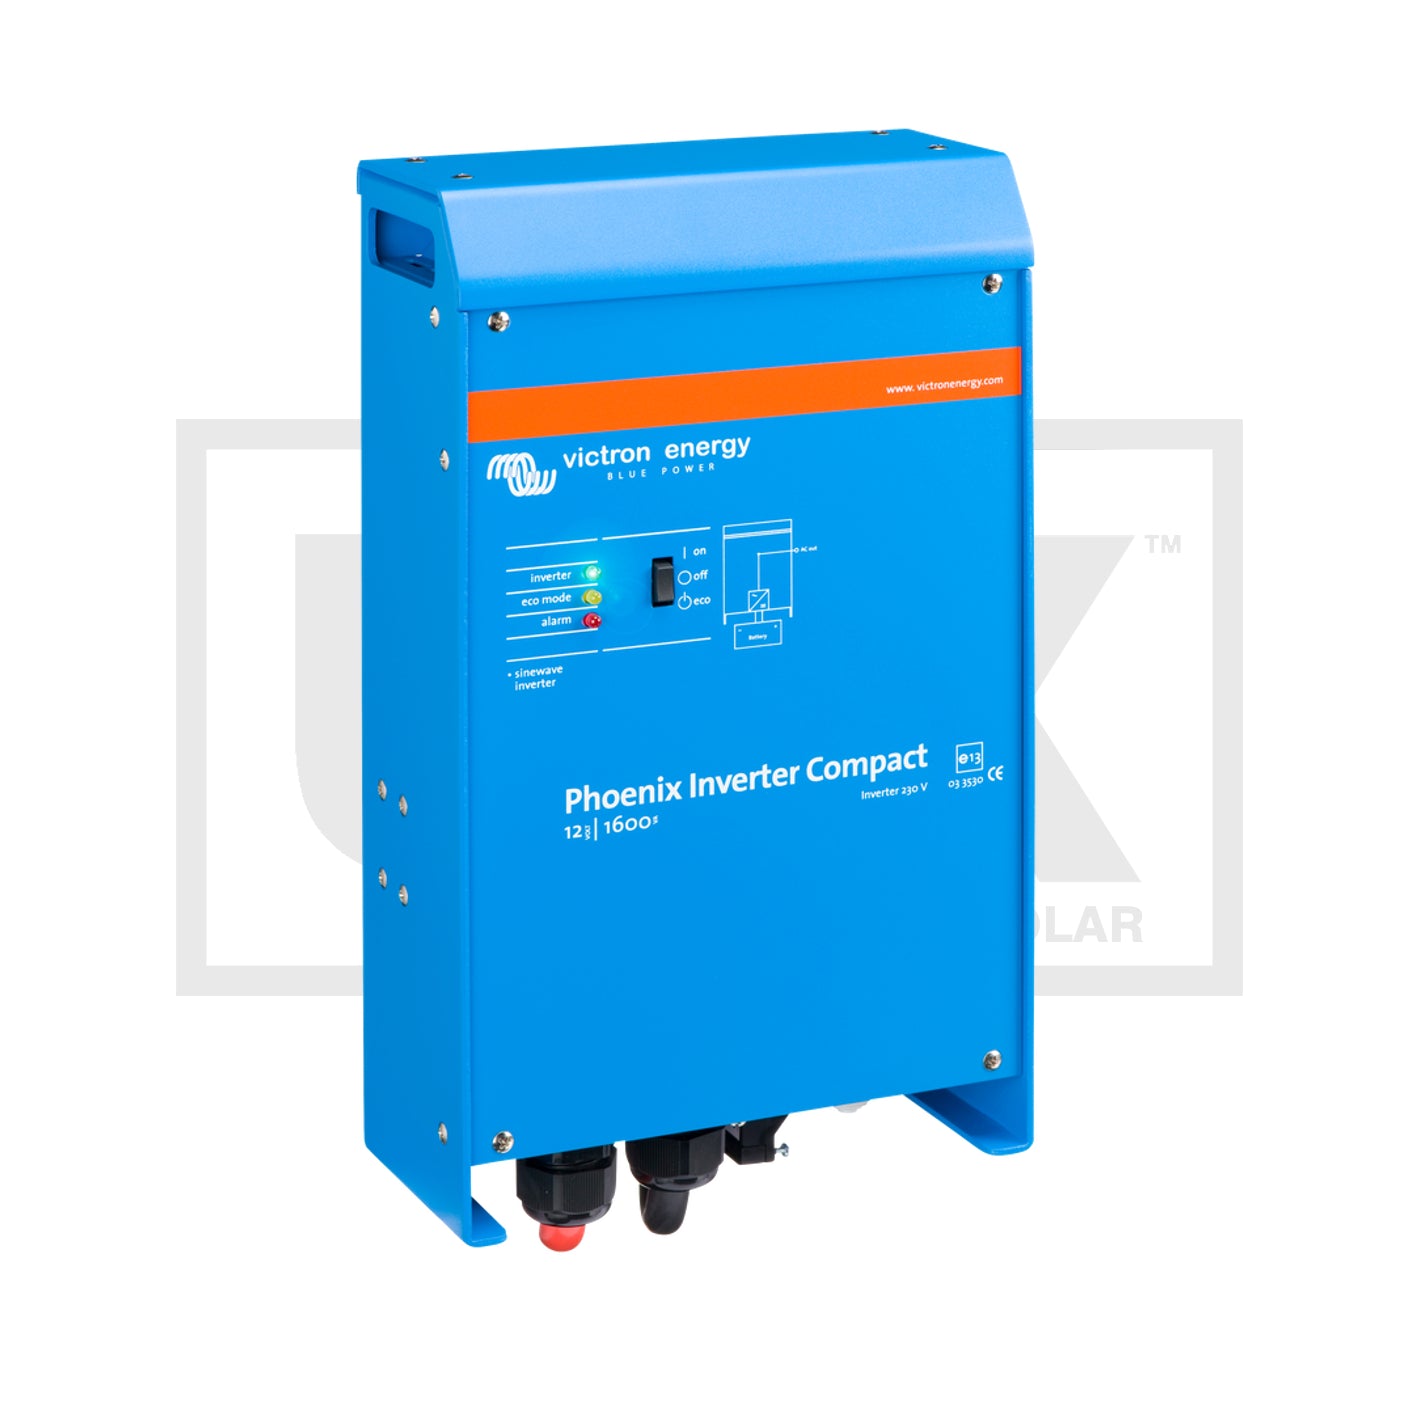 Victron Inverter Phoenix Compact 1200 to 2000